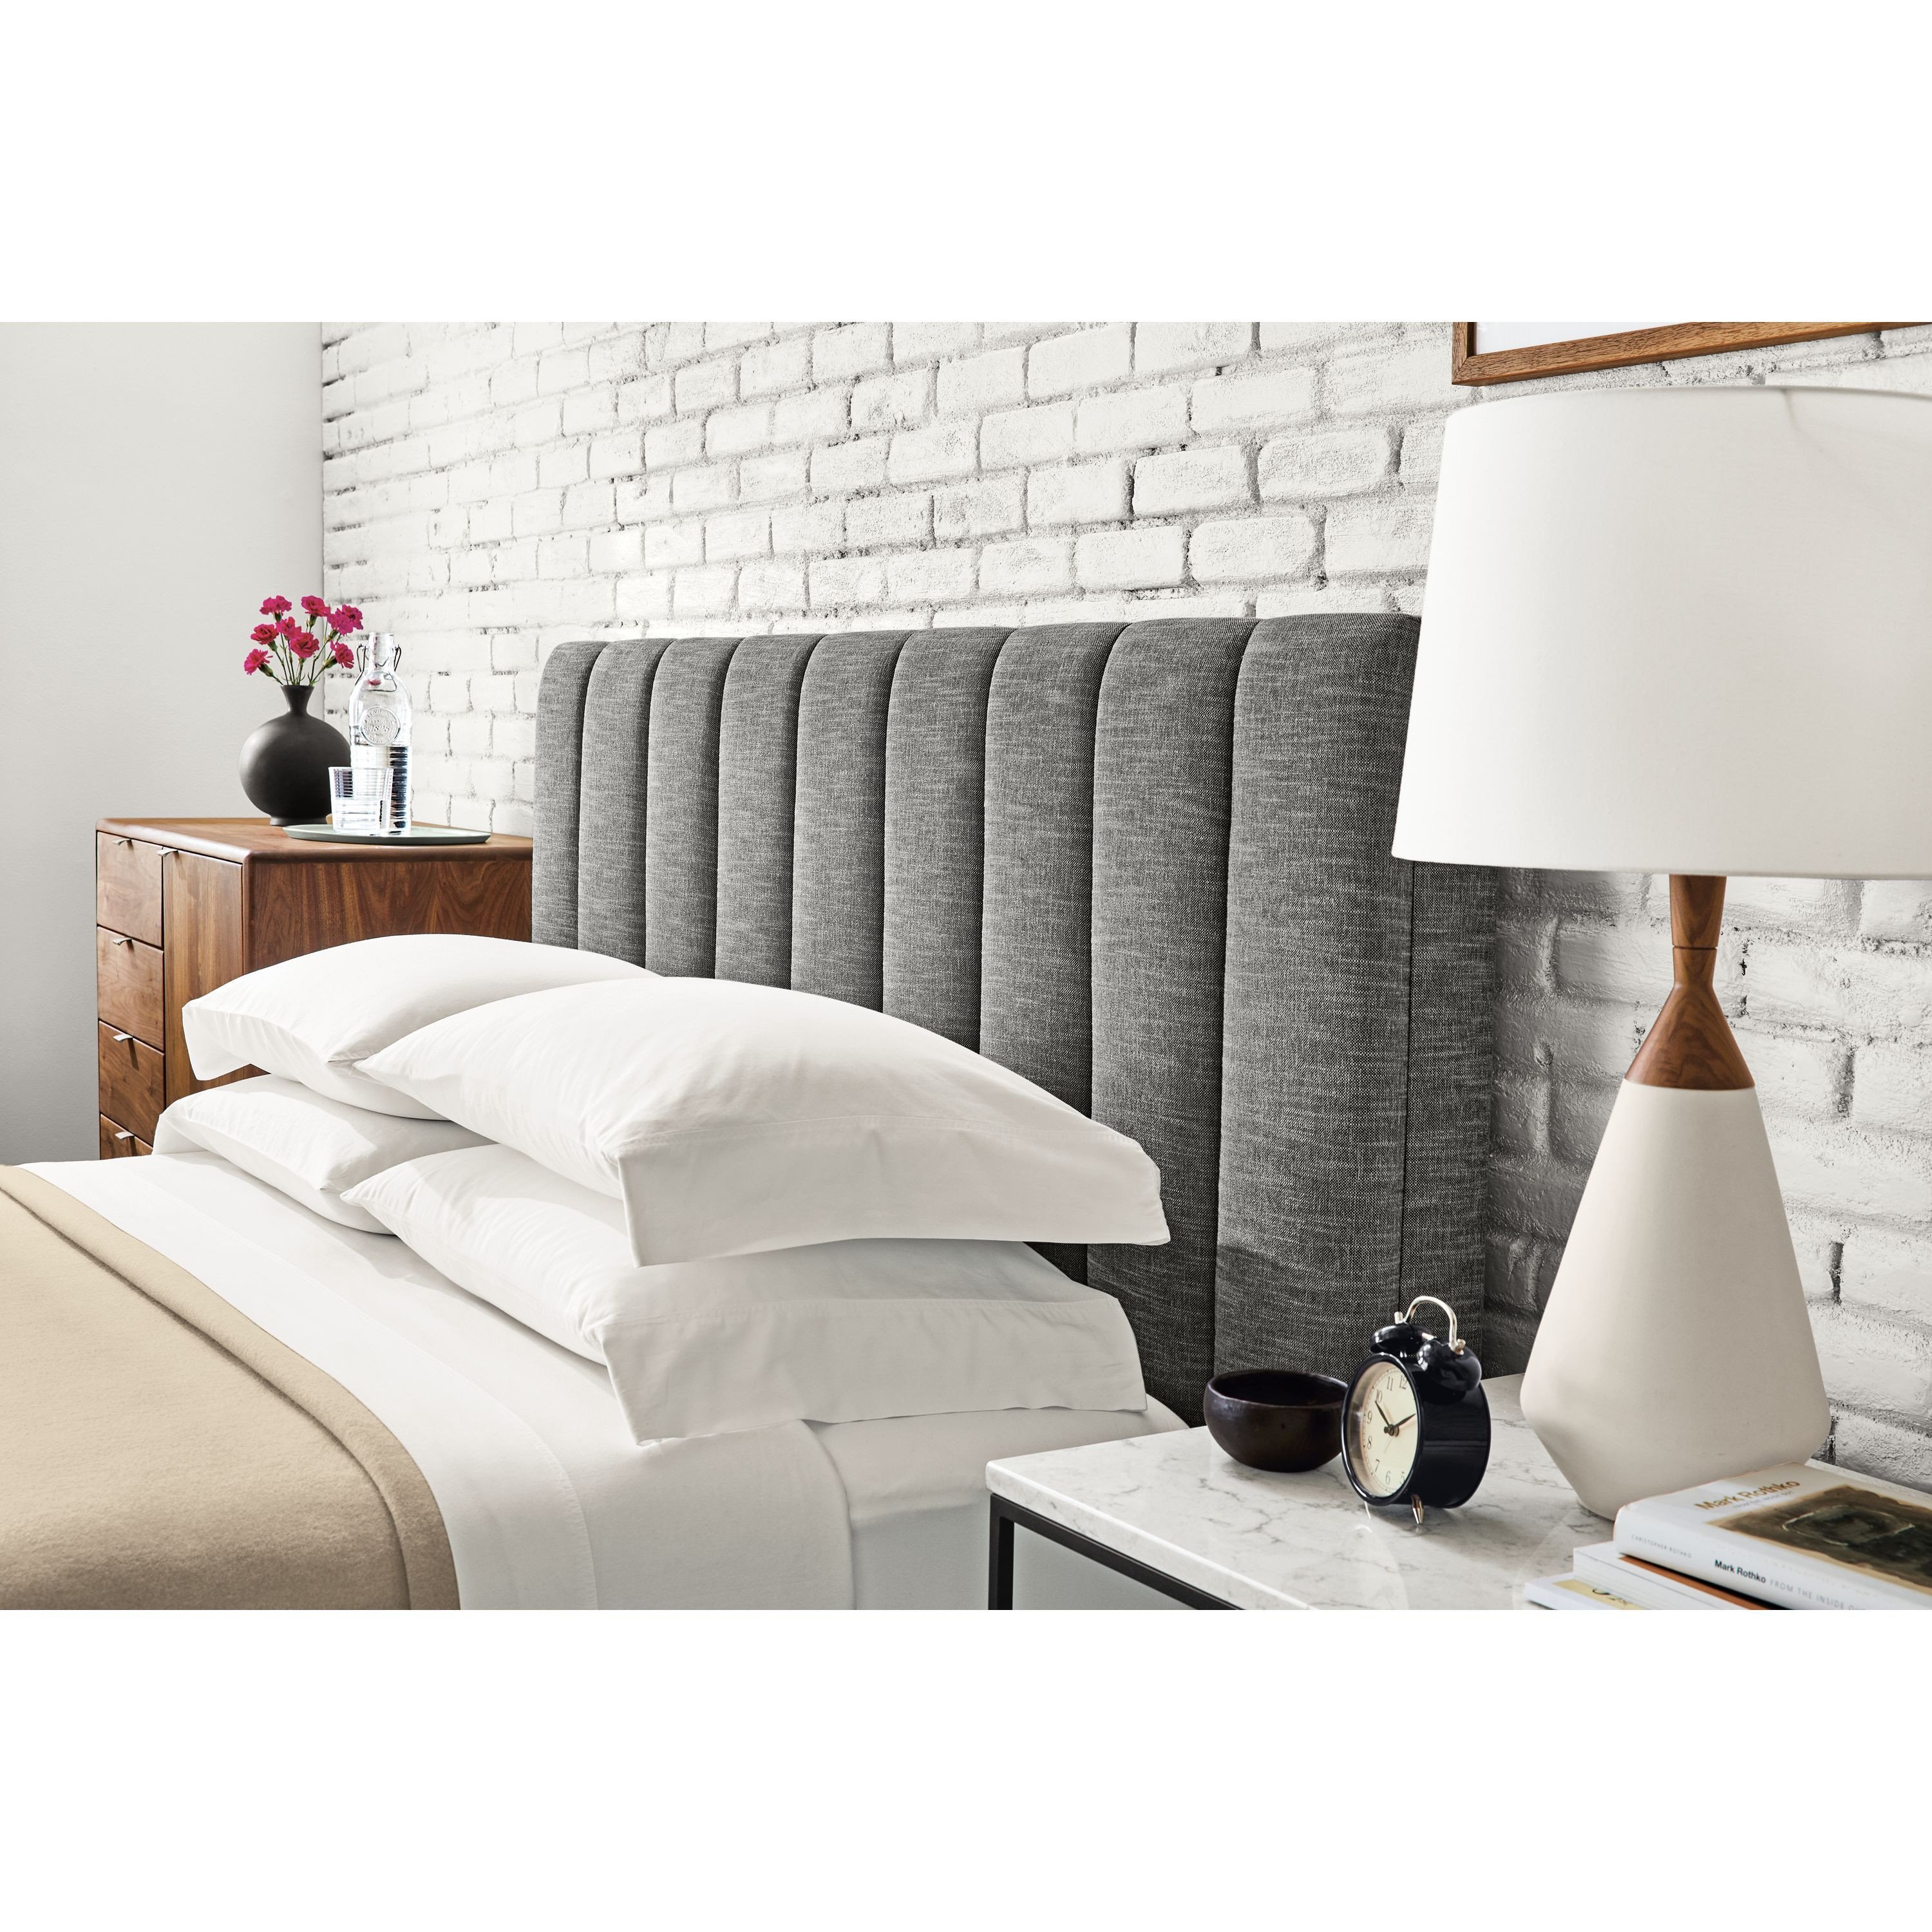 White Master Bedroom Furniture New Sateen Sheet Set Products